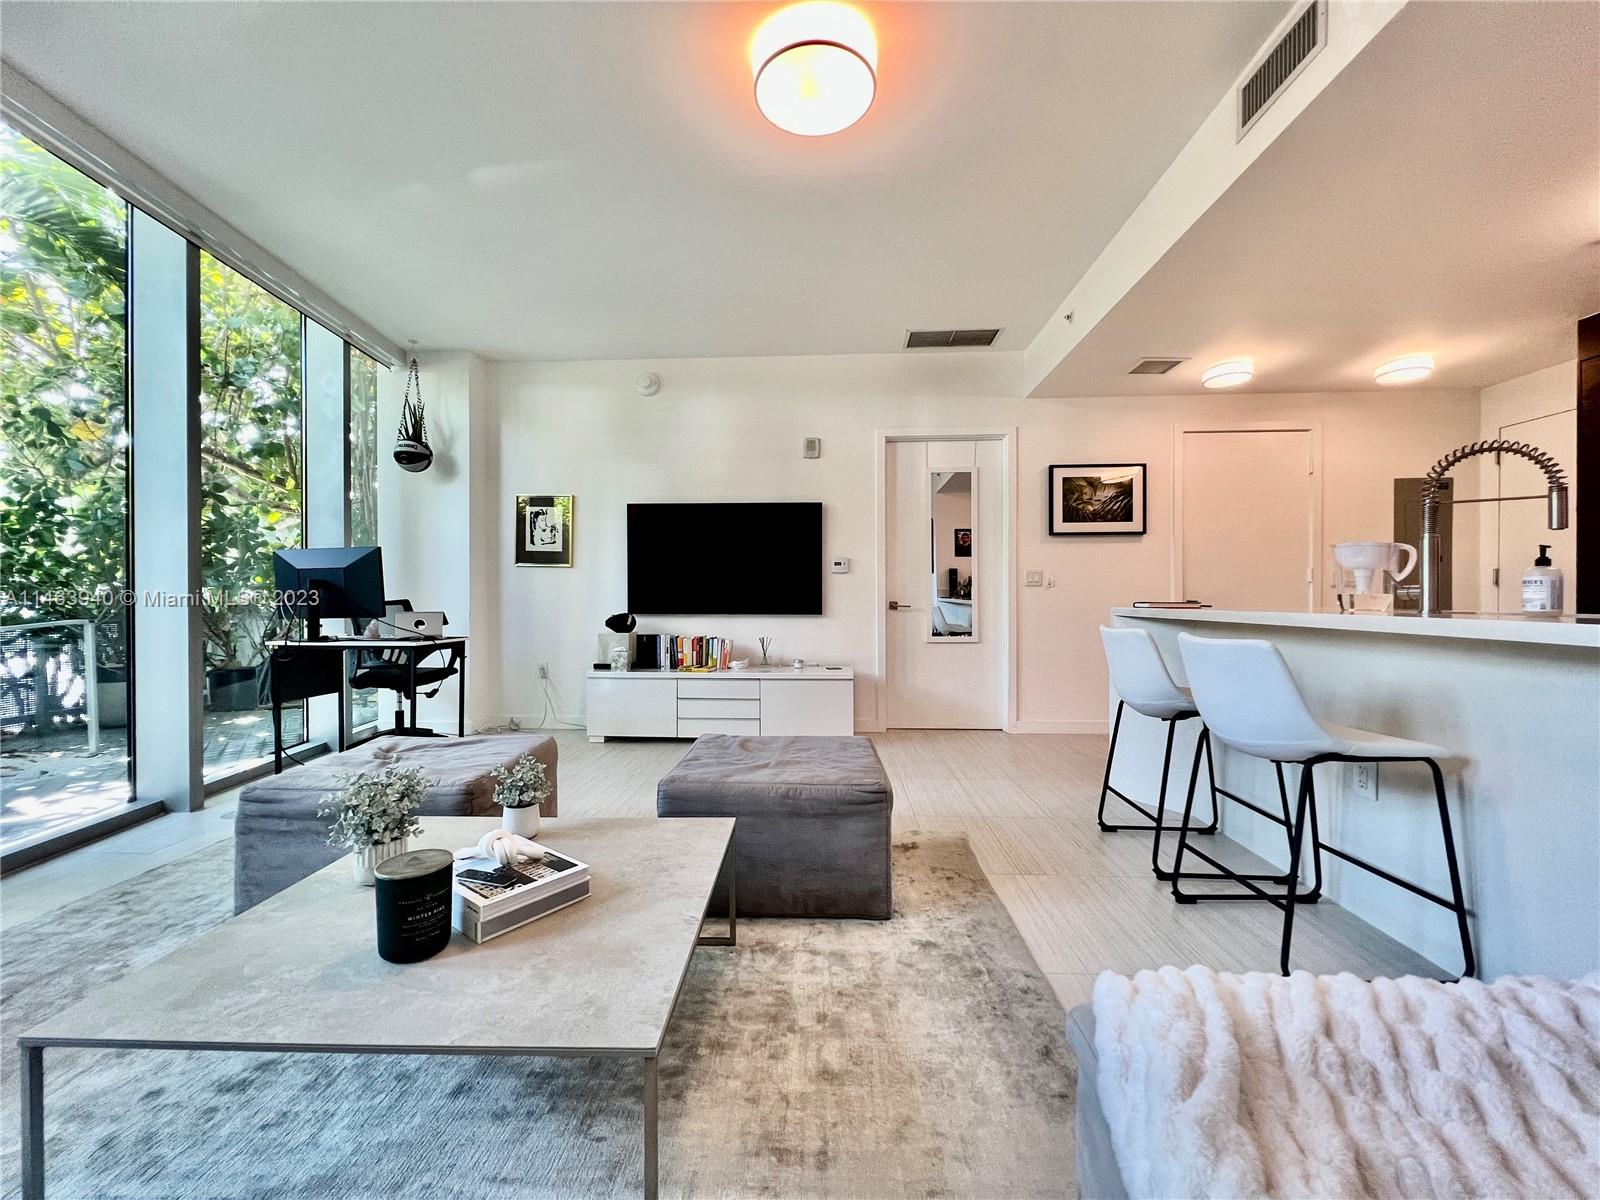 1 Collins Ave 108, Miami Beach, Florida 33139, 1 Bedroom Bedrooms, ,1 BathroomBathrooms,Residential,For Sale,1 Collins Ave 108,A11463940